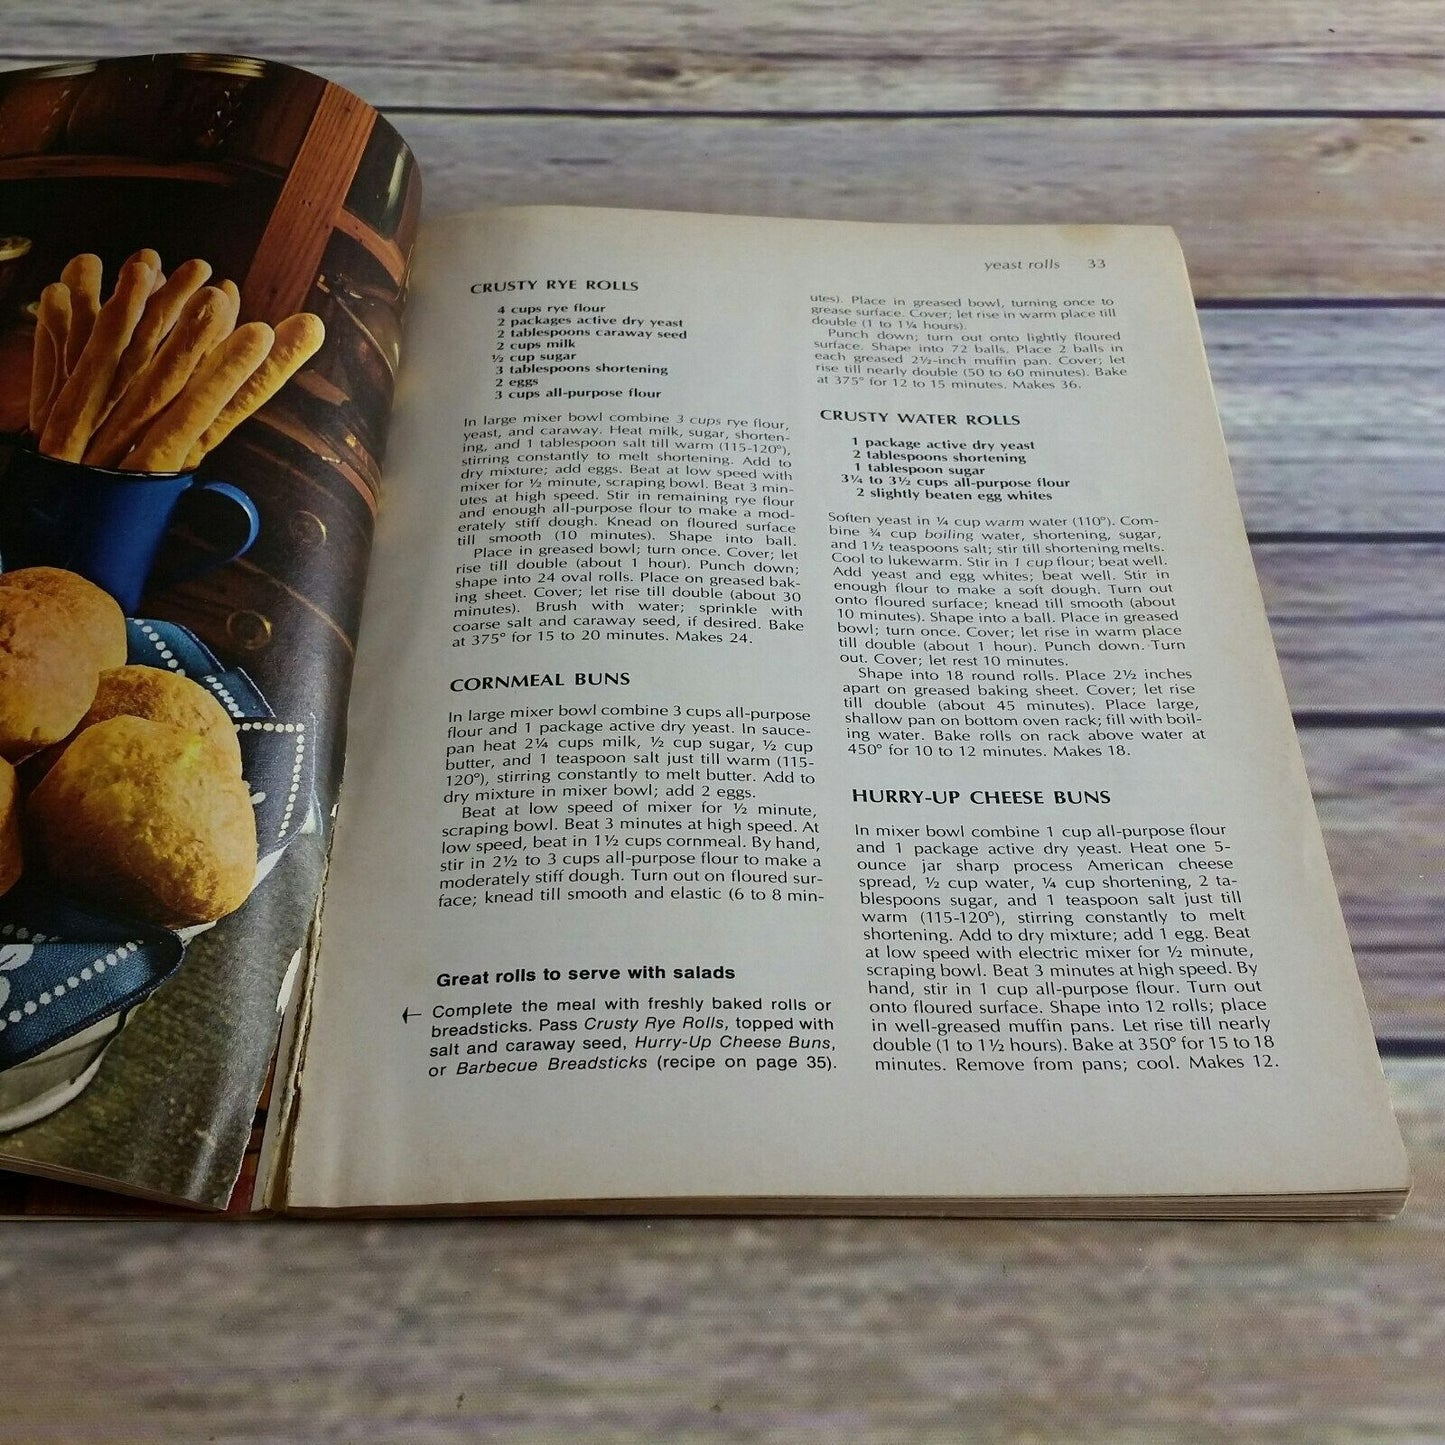 Vintage Cookbook Homemade Breads Recipes Better Home and Gardens 1981 Paperback Bread Recipes Baking Bread yeast Breads Sourdough Natural